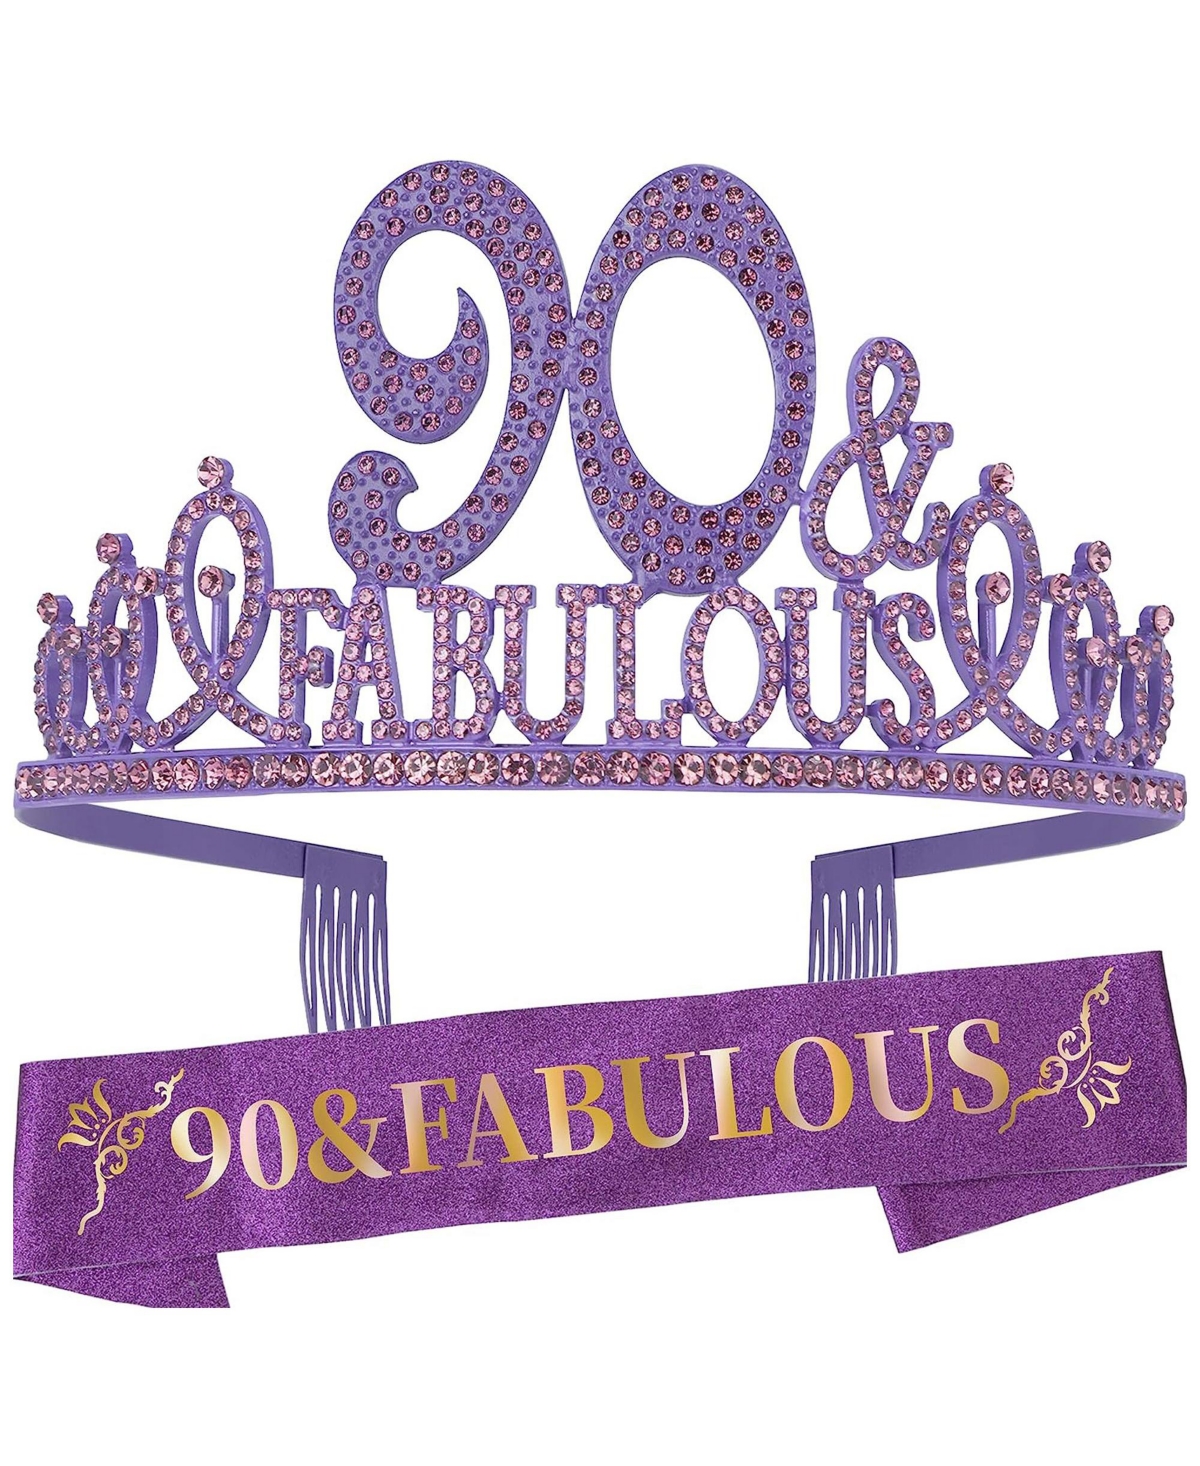 90th Birthday Gifts for Women, 90th Birthday Crown and Sash for Women, 90th Birthday Decorations for Women, 90th Birthday Party Favors, 90t